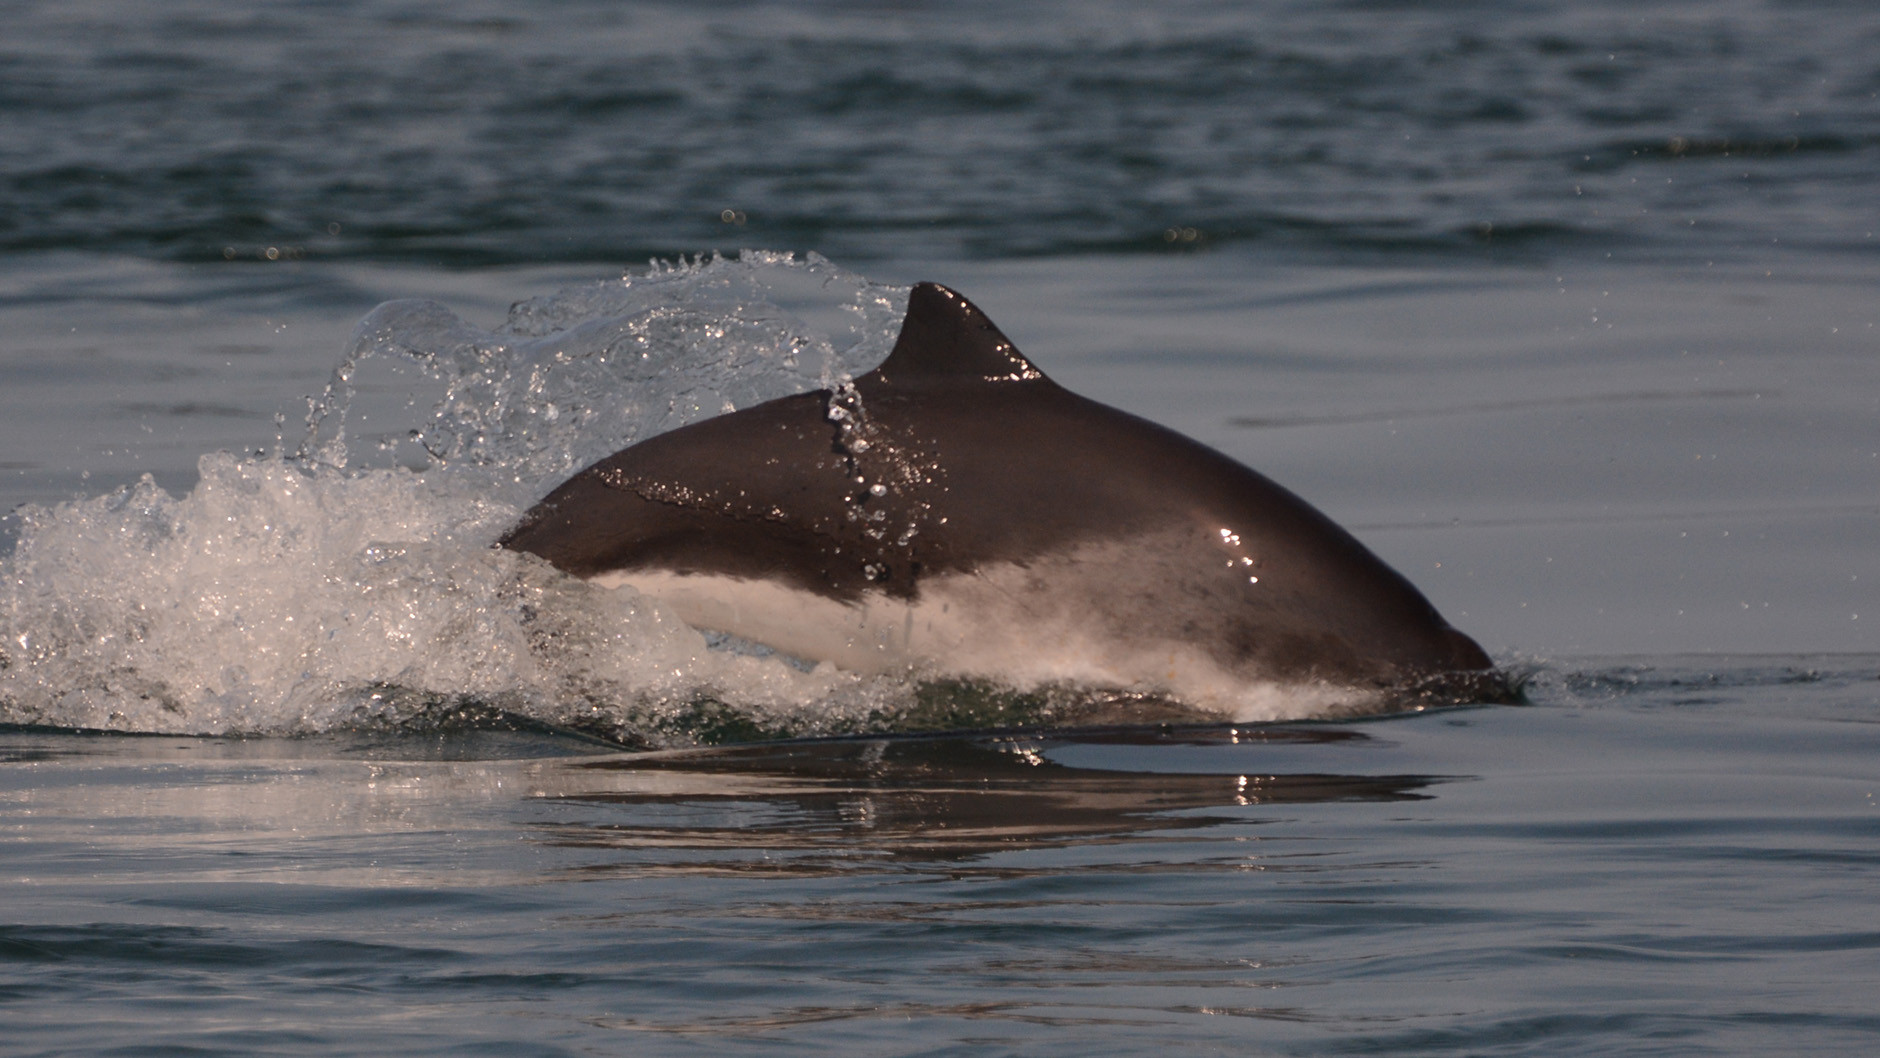 Photograph of a Harbour Porpoise surfacing